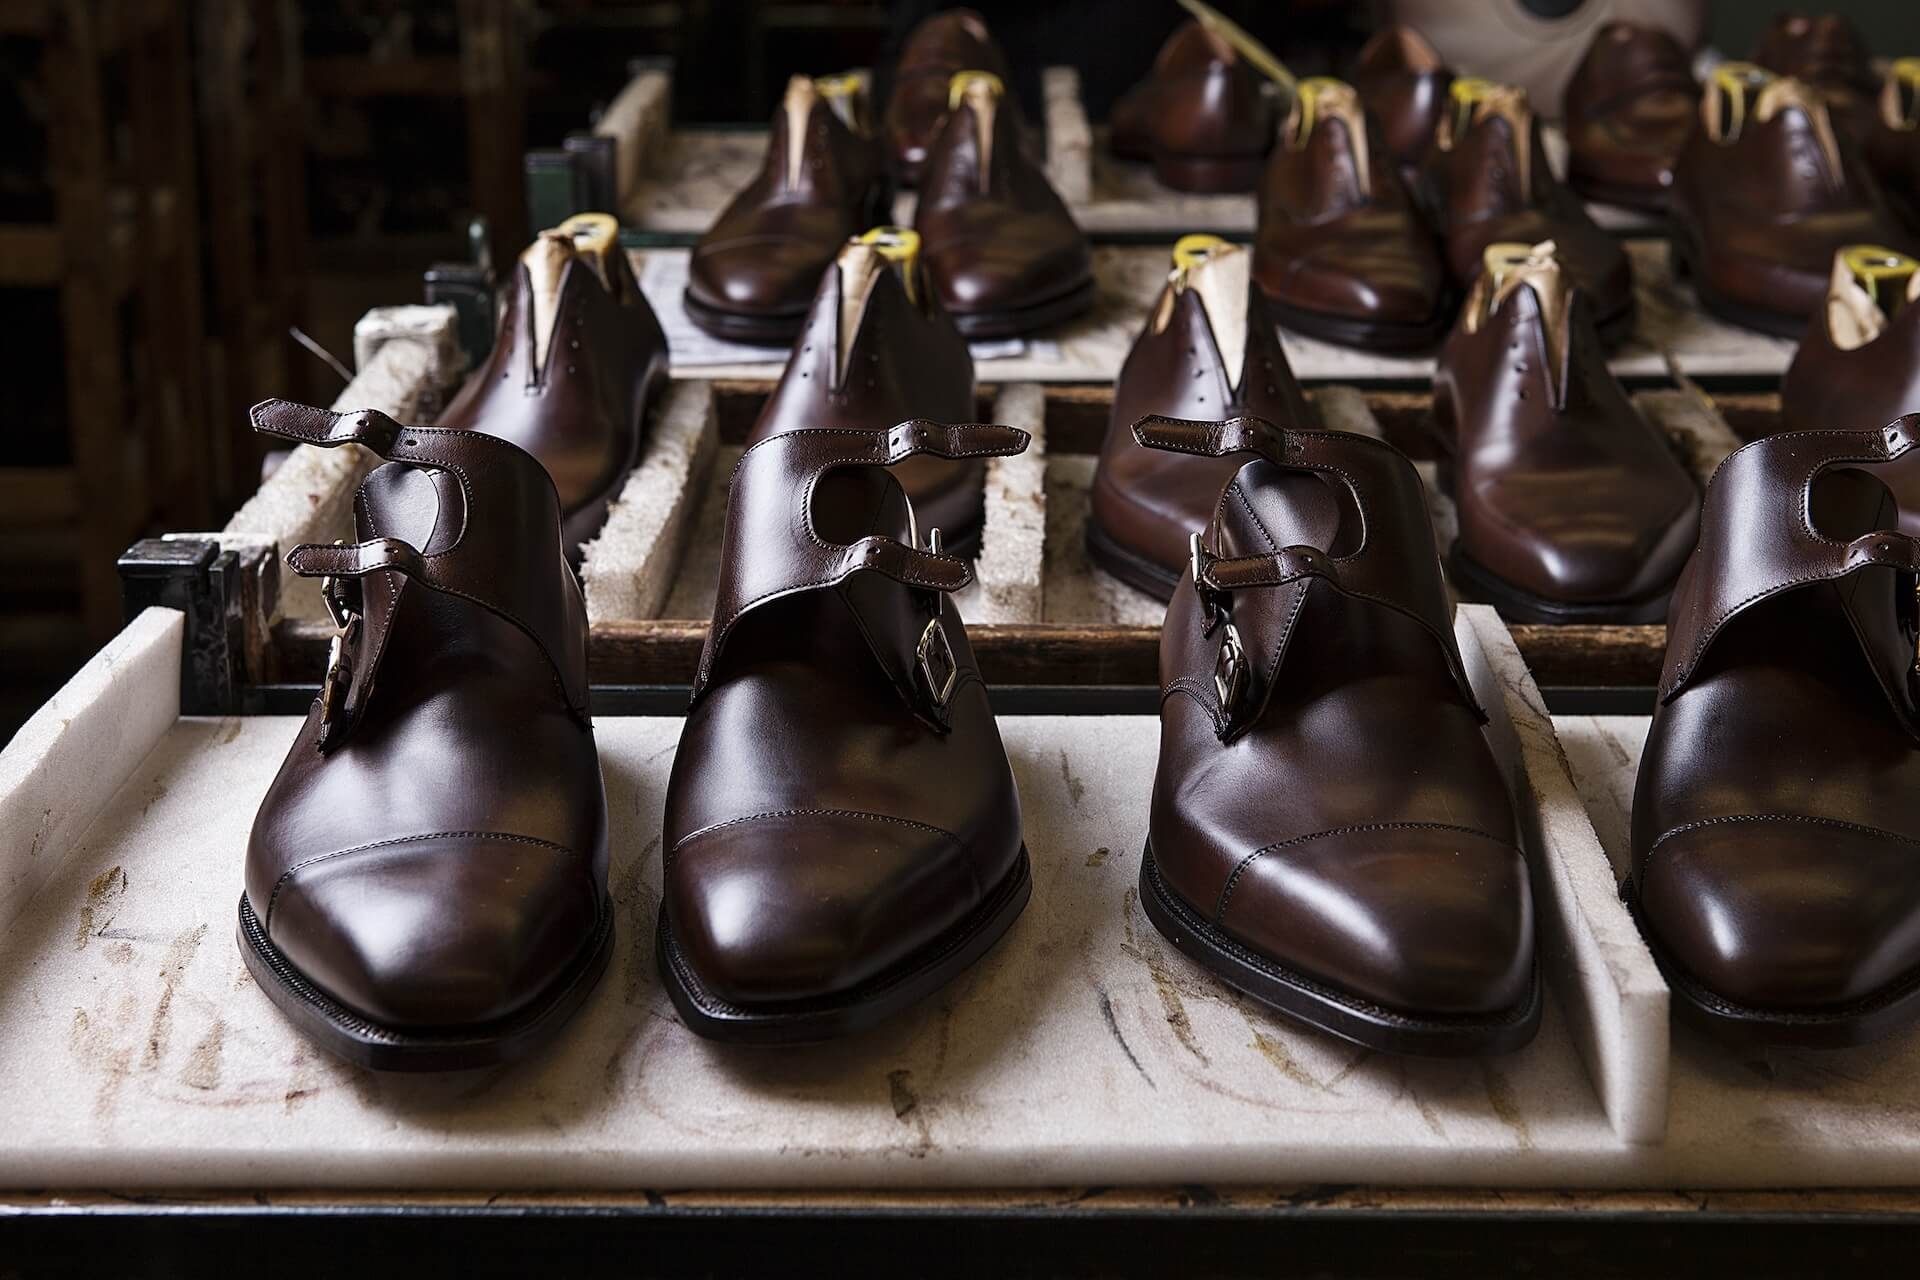 Rows of leather shoes being made